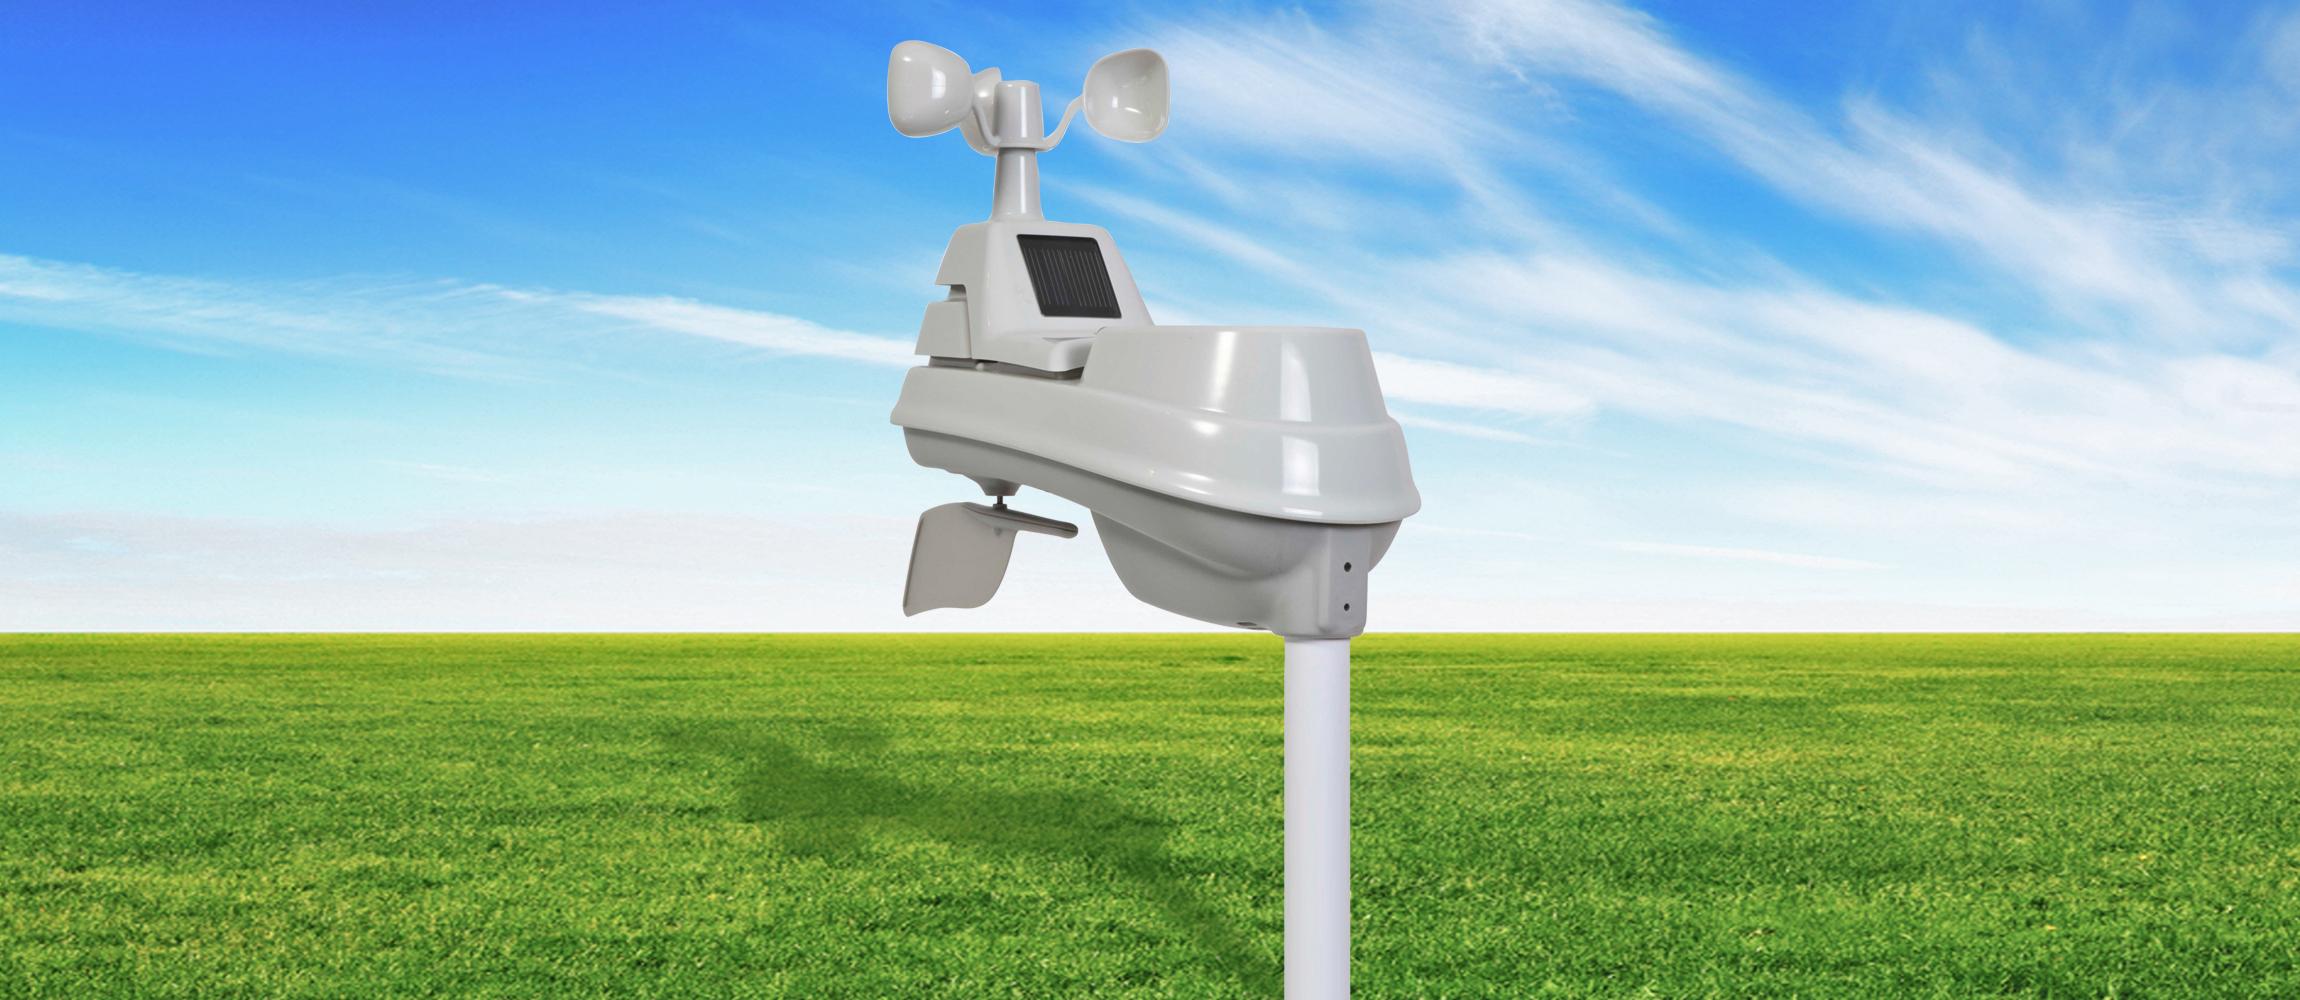 Home Weather Station AcuRite Wireless Solar Digital Outdoor ...